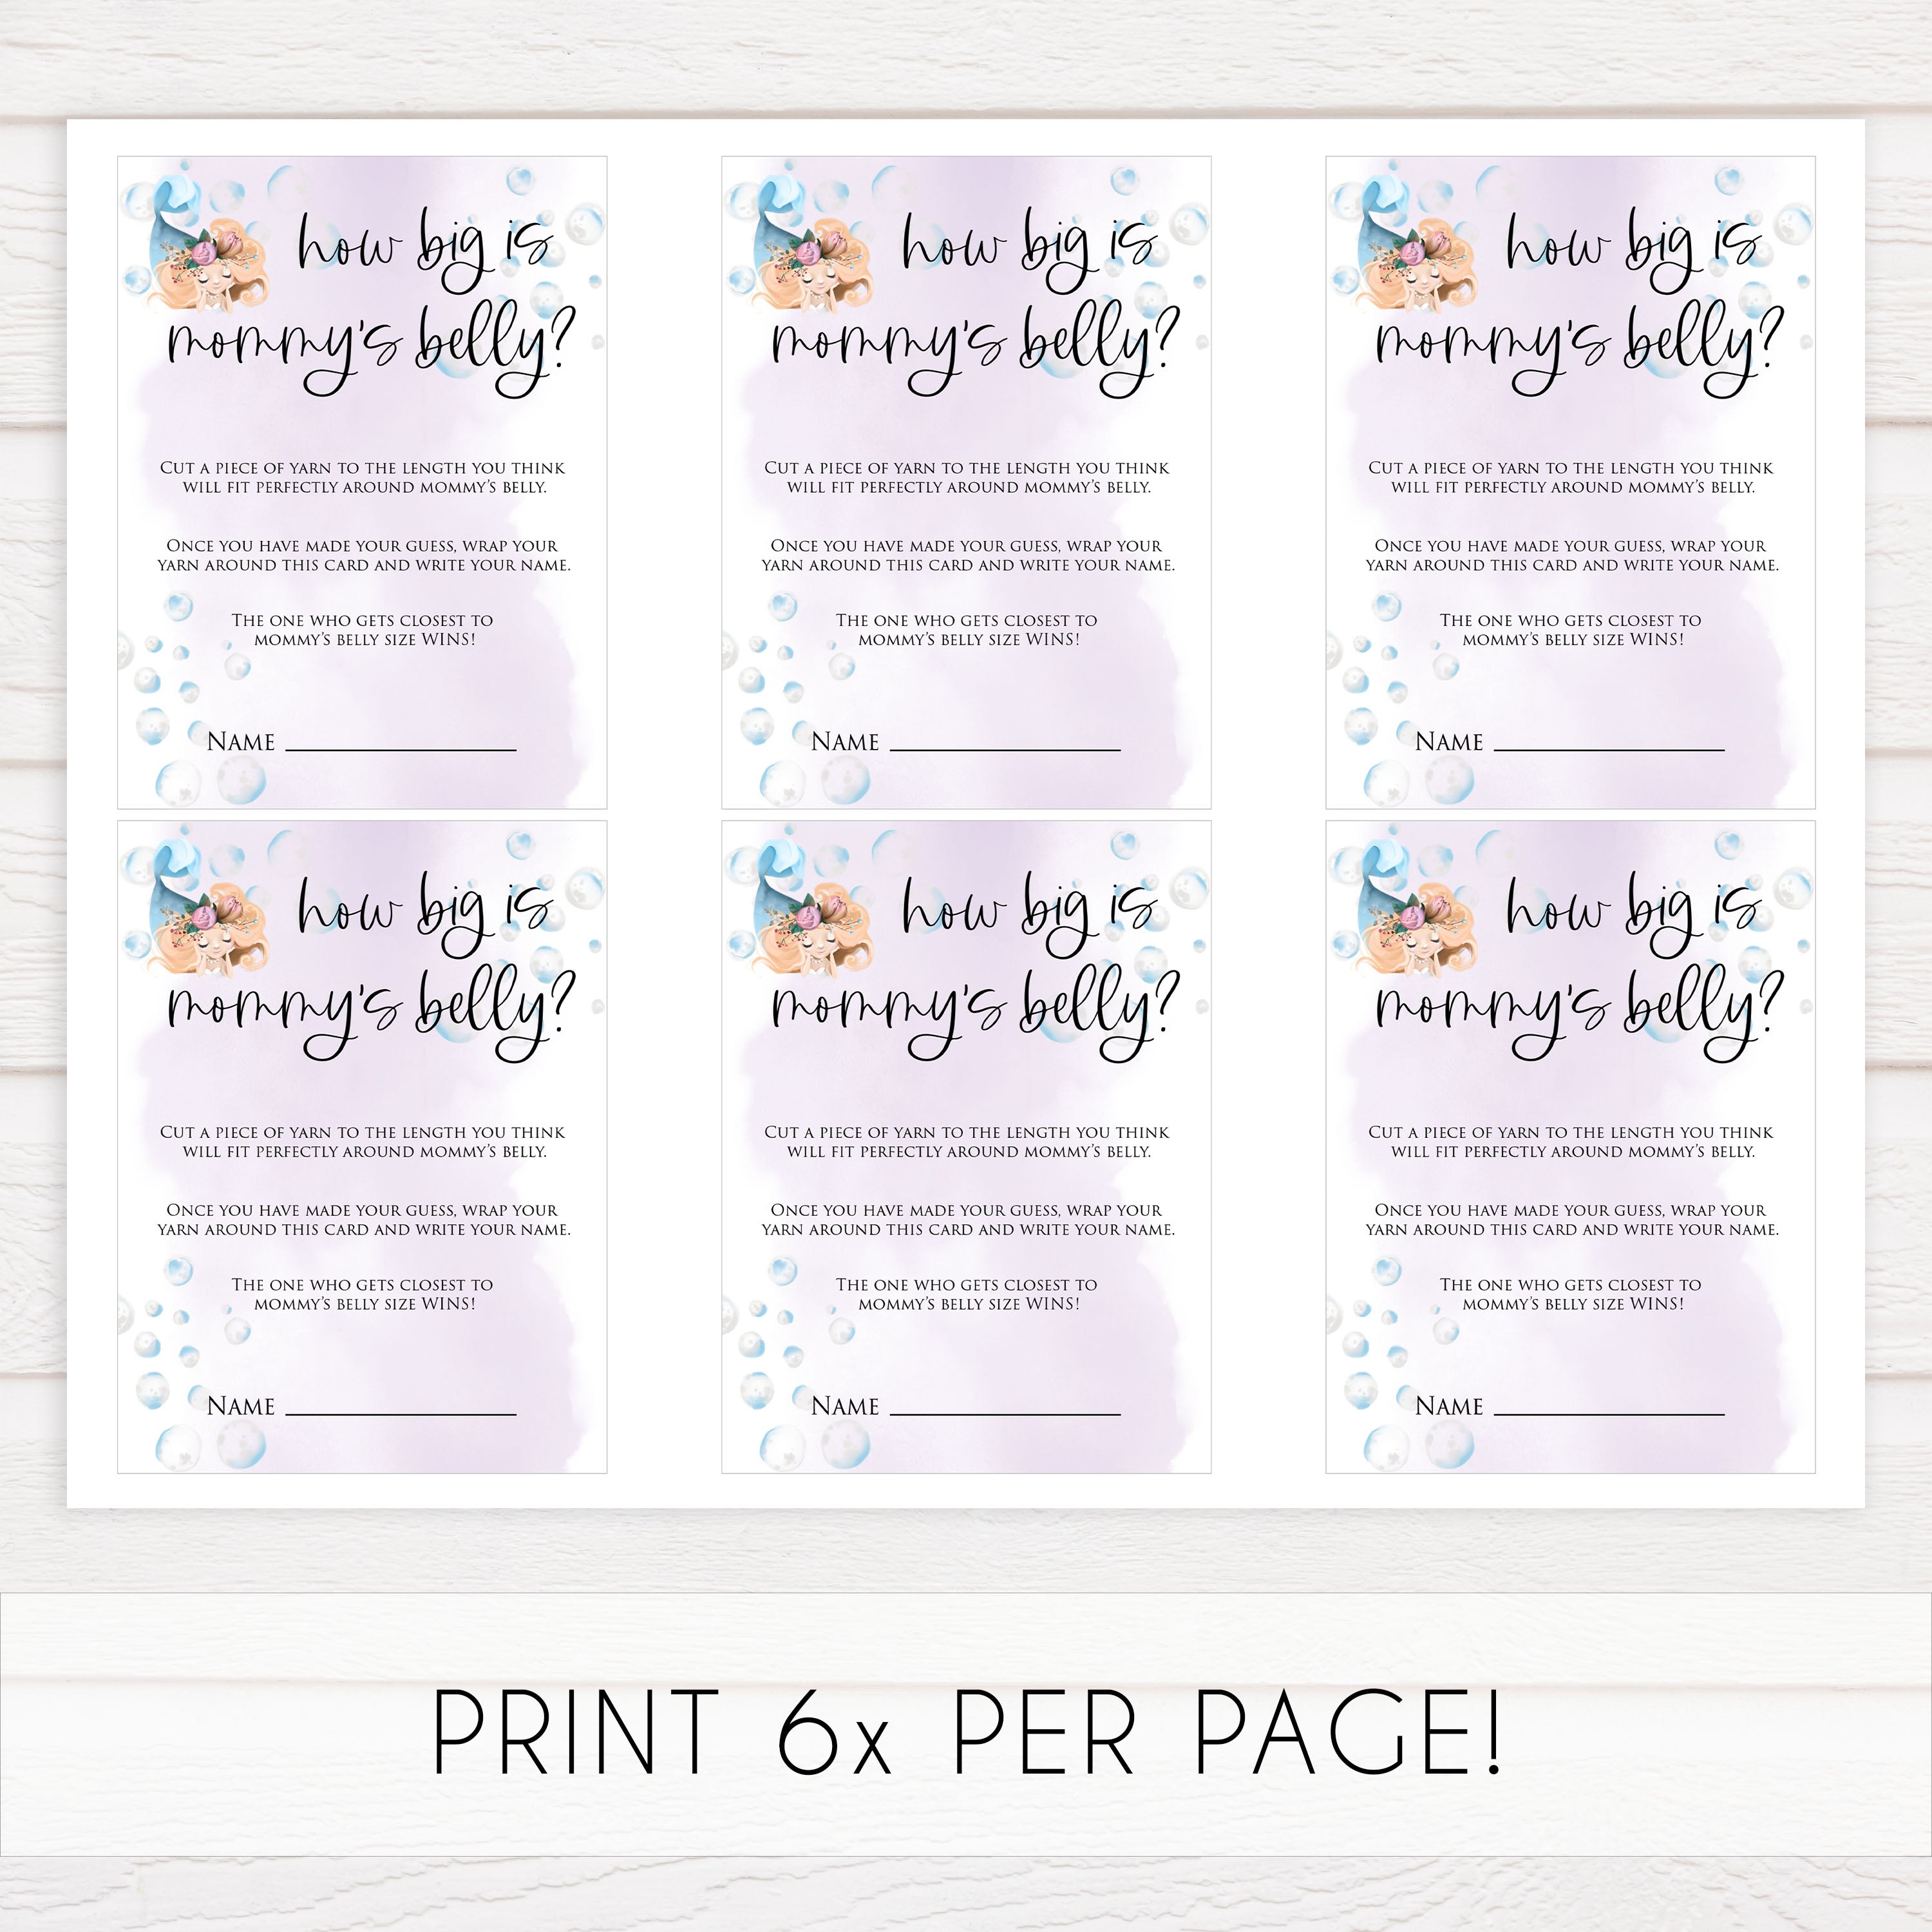 how big is mommys belly game, Printable baby shower games, little mermaid baby games, baby shower games, fun baby shower ideas, top baby shower ideas, little mermaid baby shower, baby shower games, pink hearts baby shower ideas